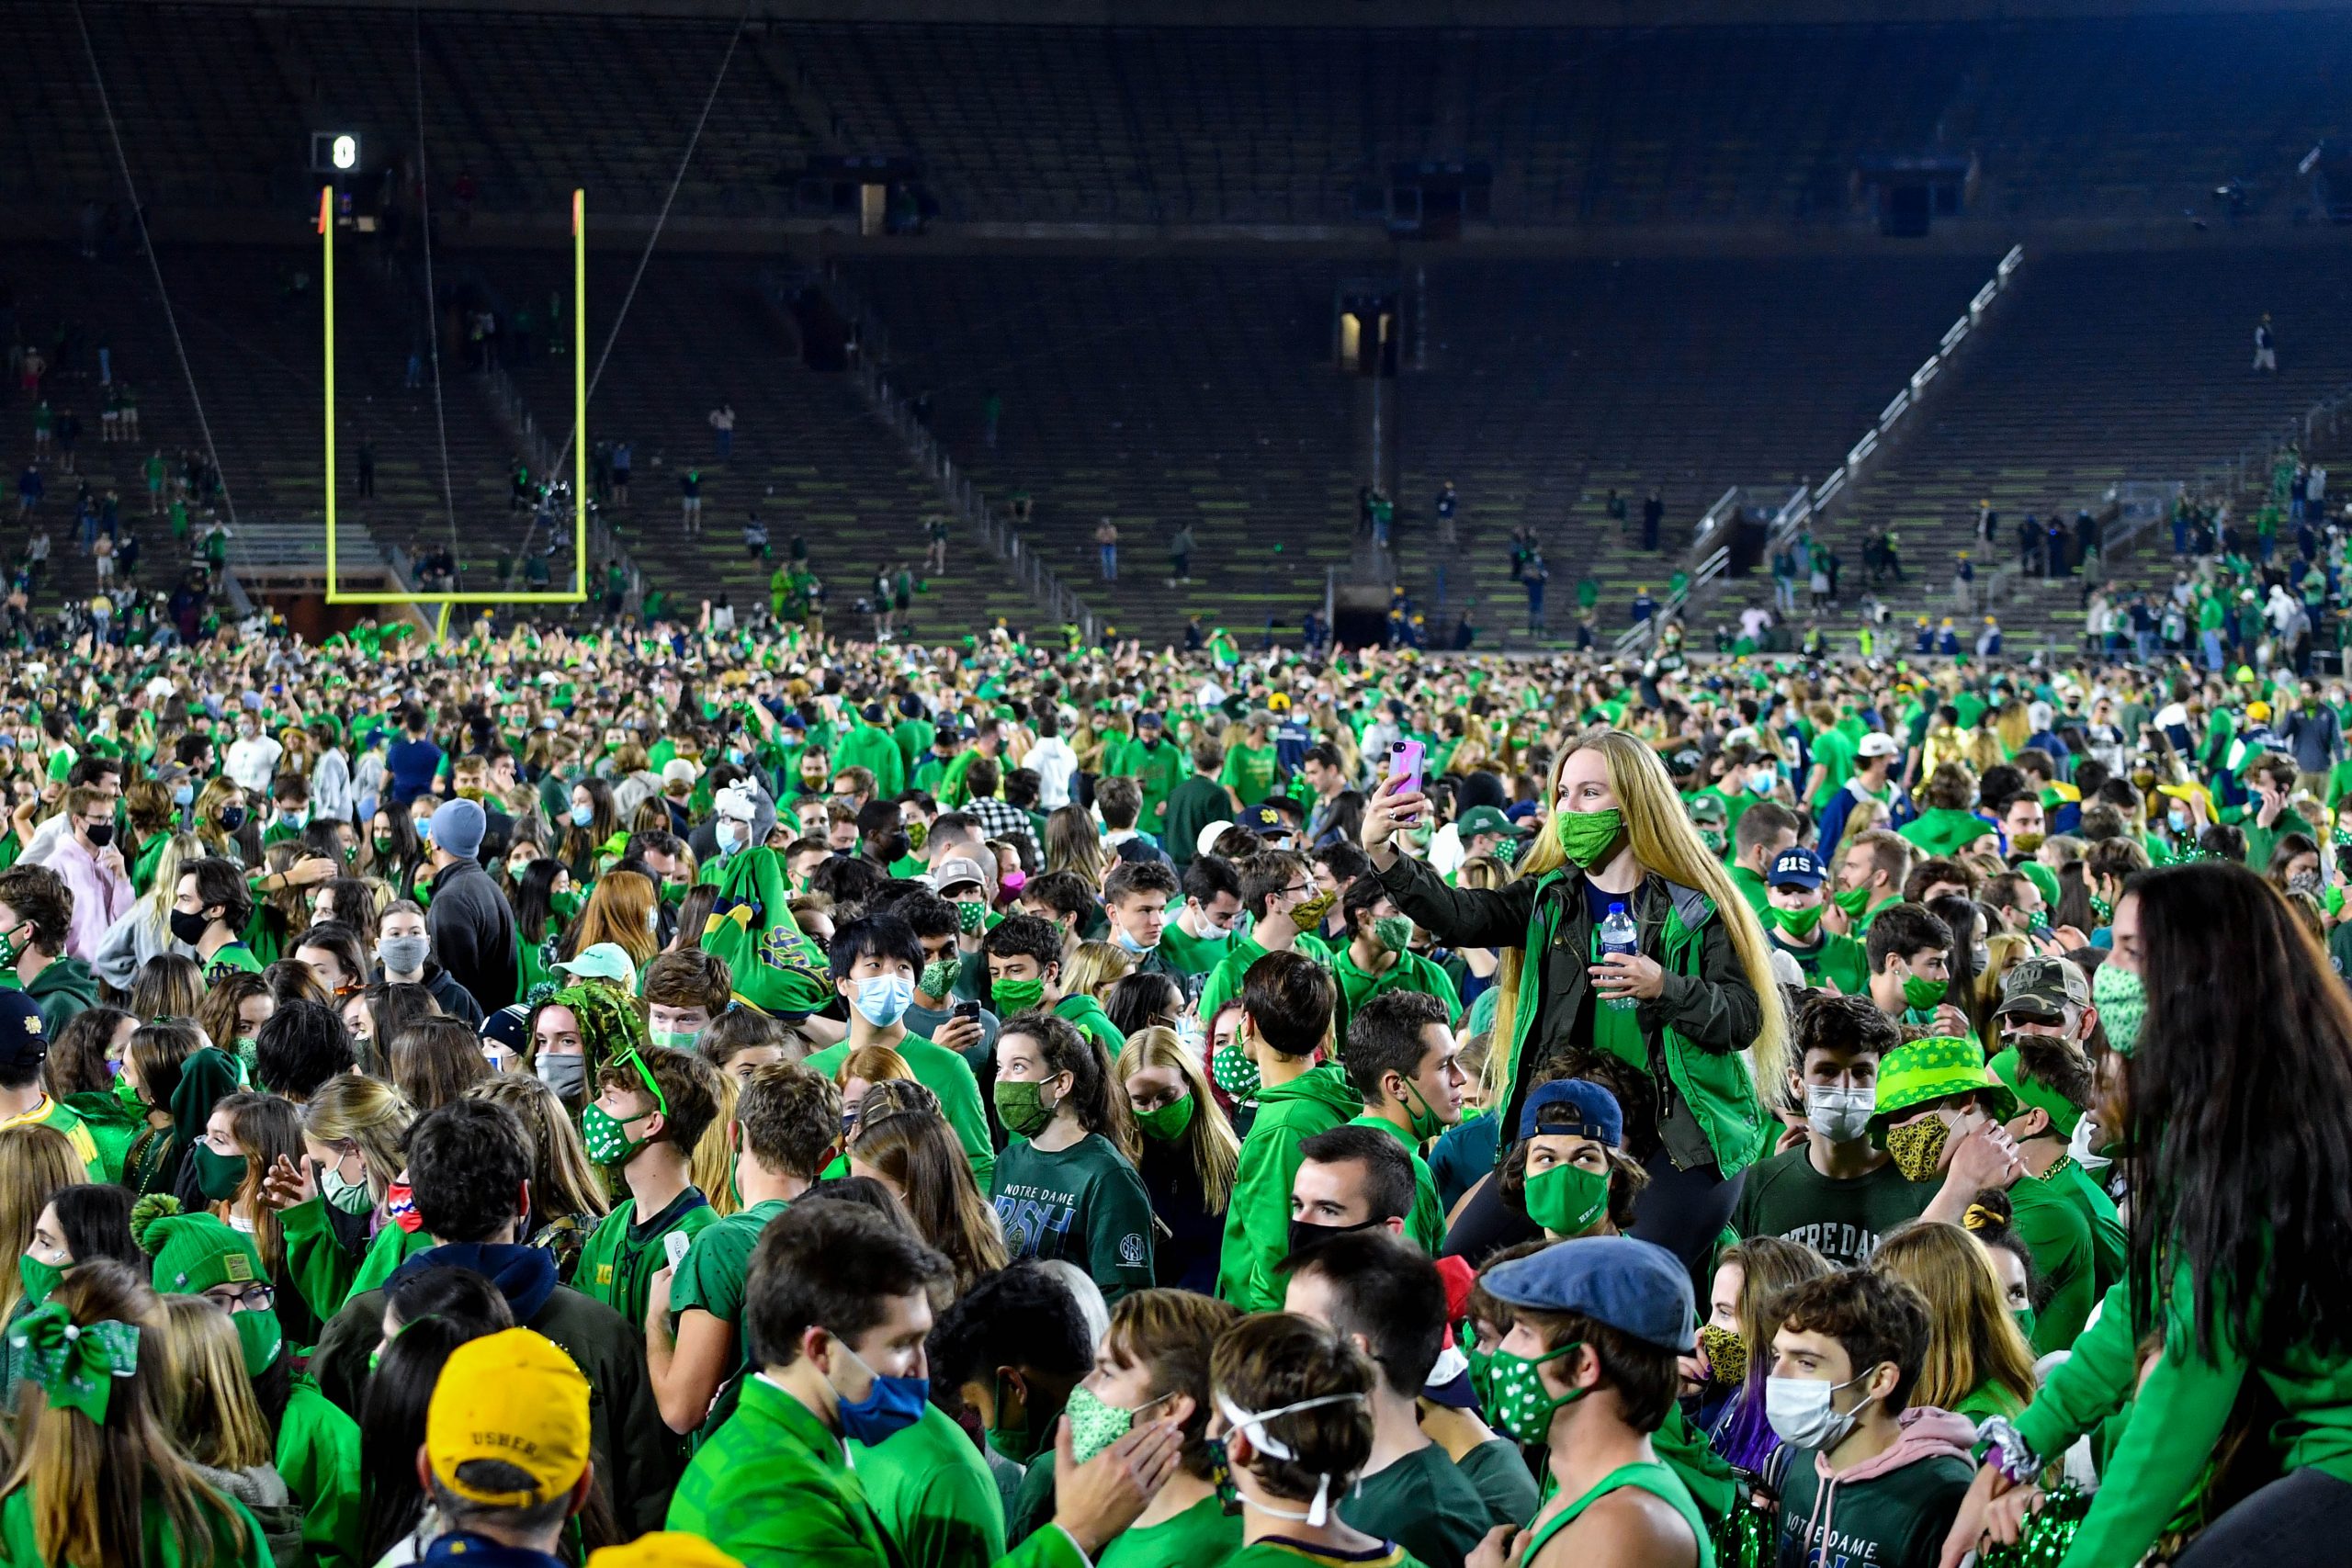 Could Notre Dame be sanctioned for fans storming field after win? The